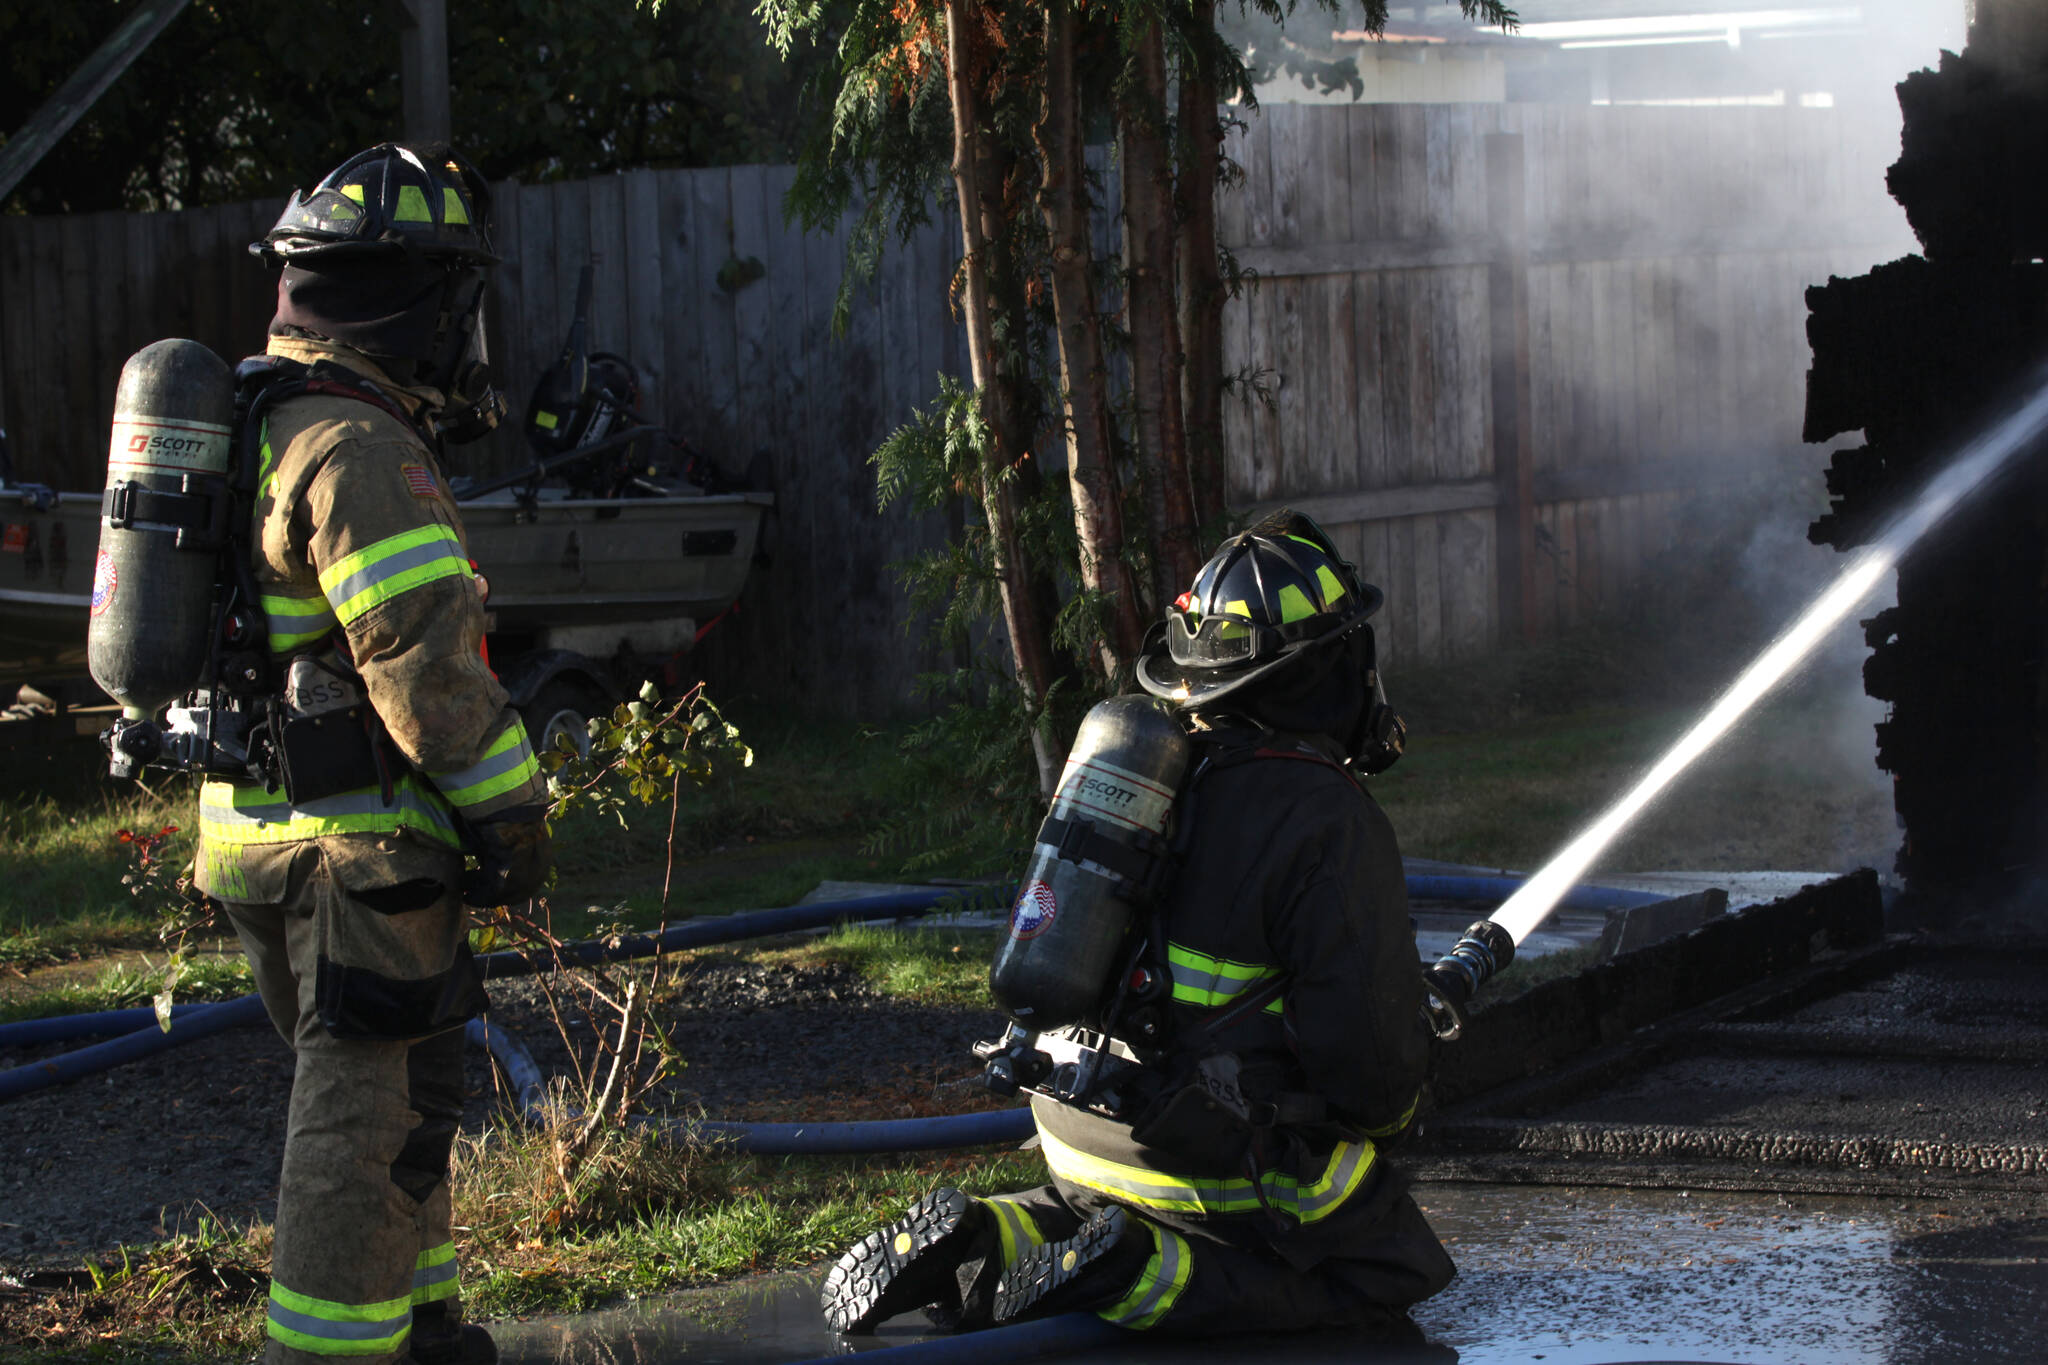 Firefighters from East Grays Harbor Fire and Rescue spray down a structure fire in Elma on Nov. 15, 2022. (Michael S. Lockett / The Daily World File)